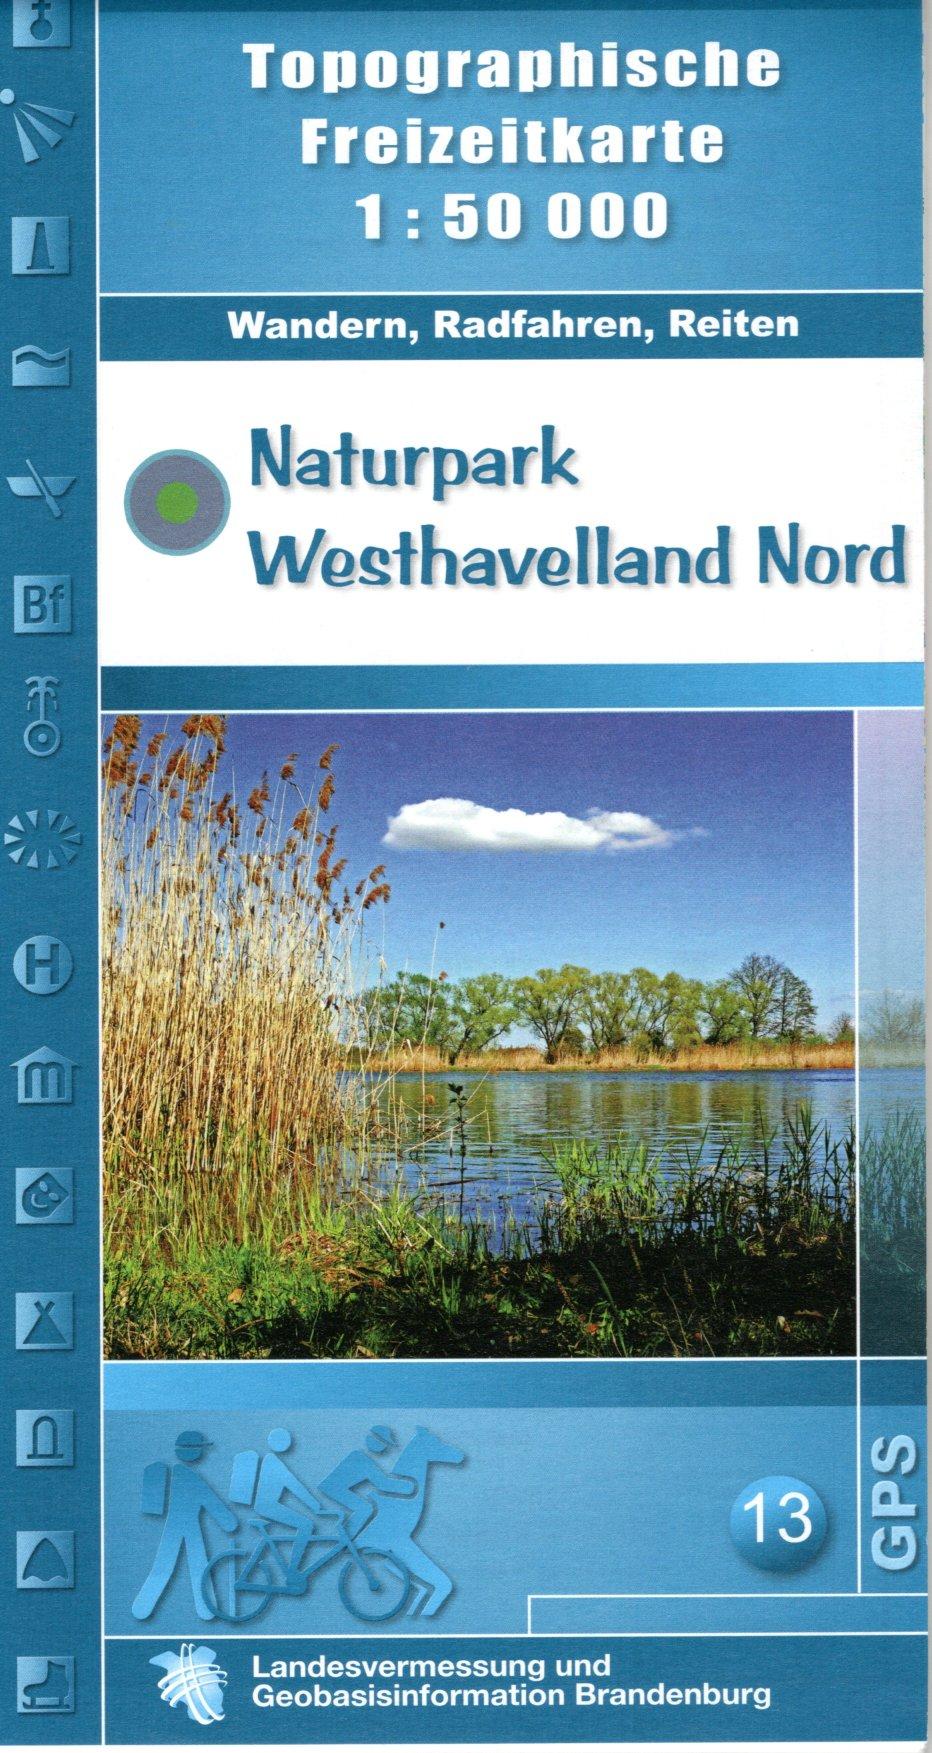 NP Westhavelland Nord